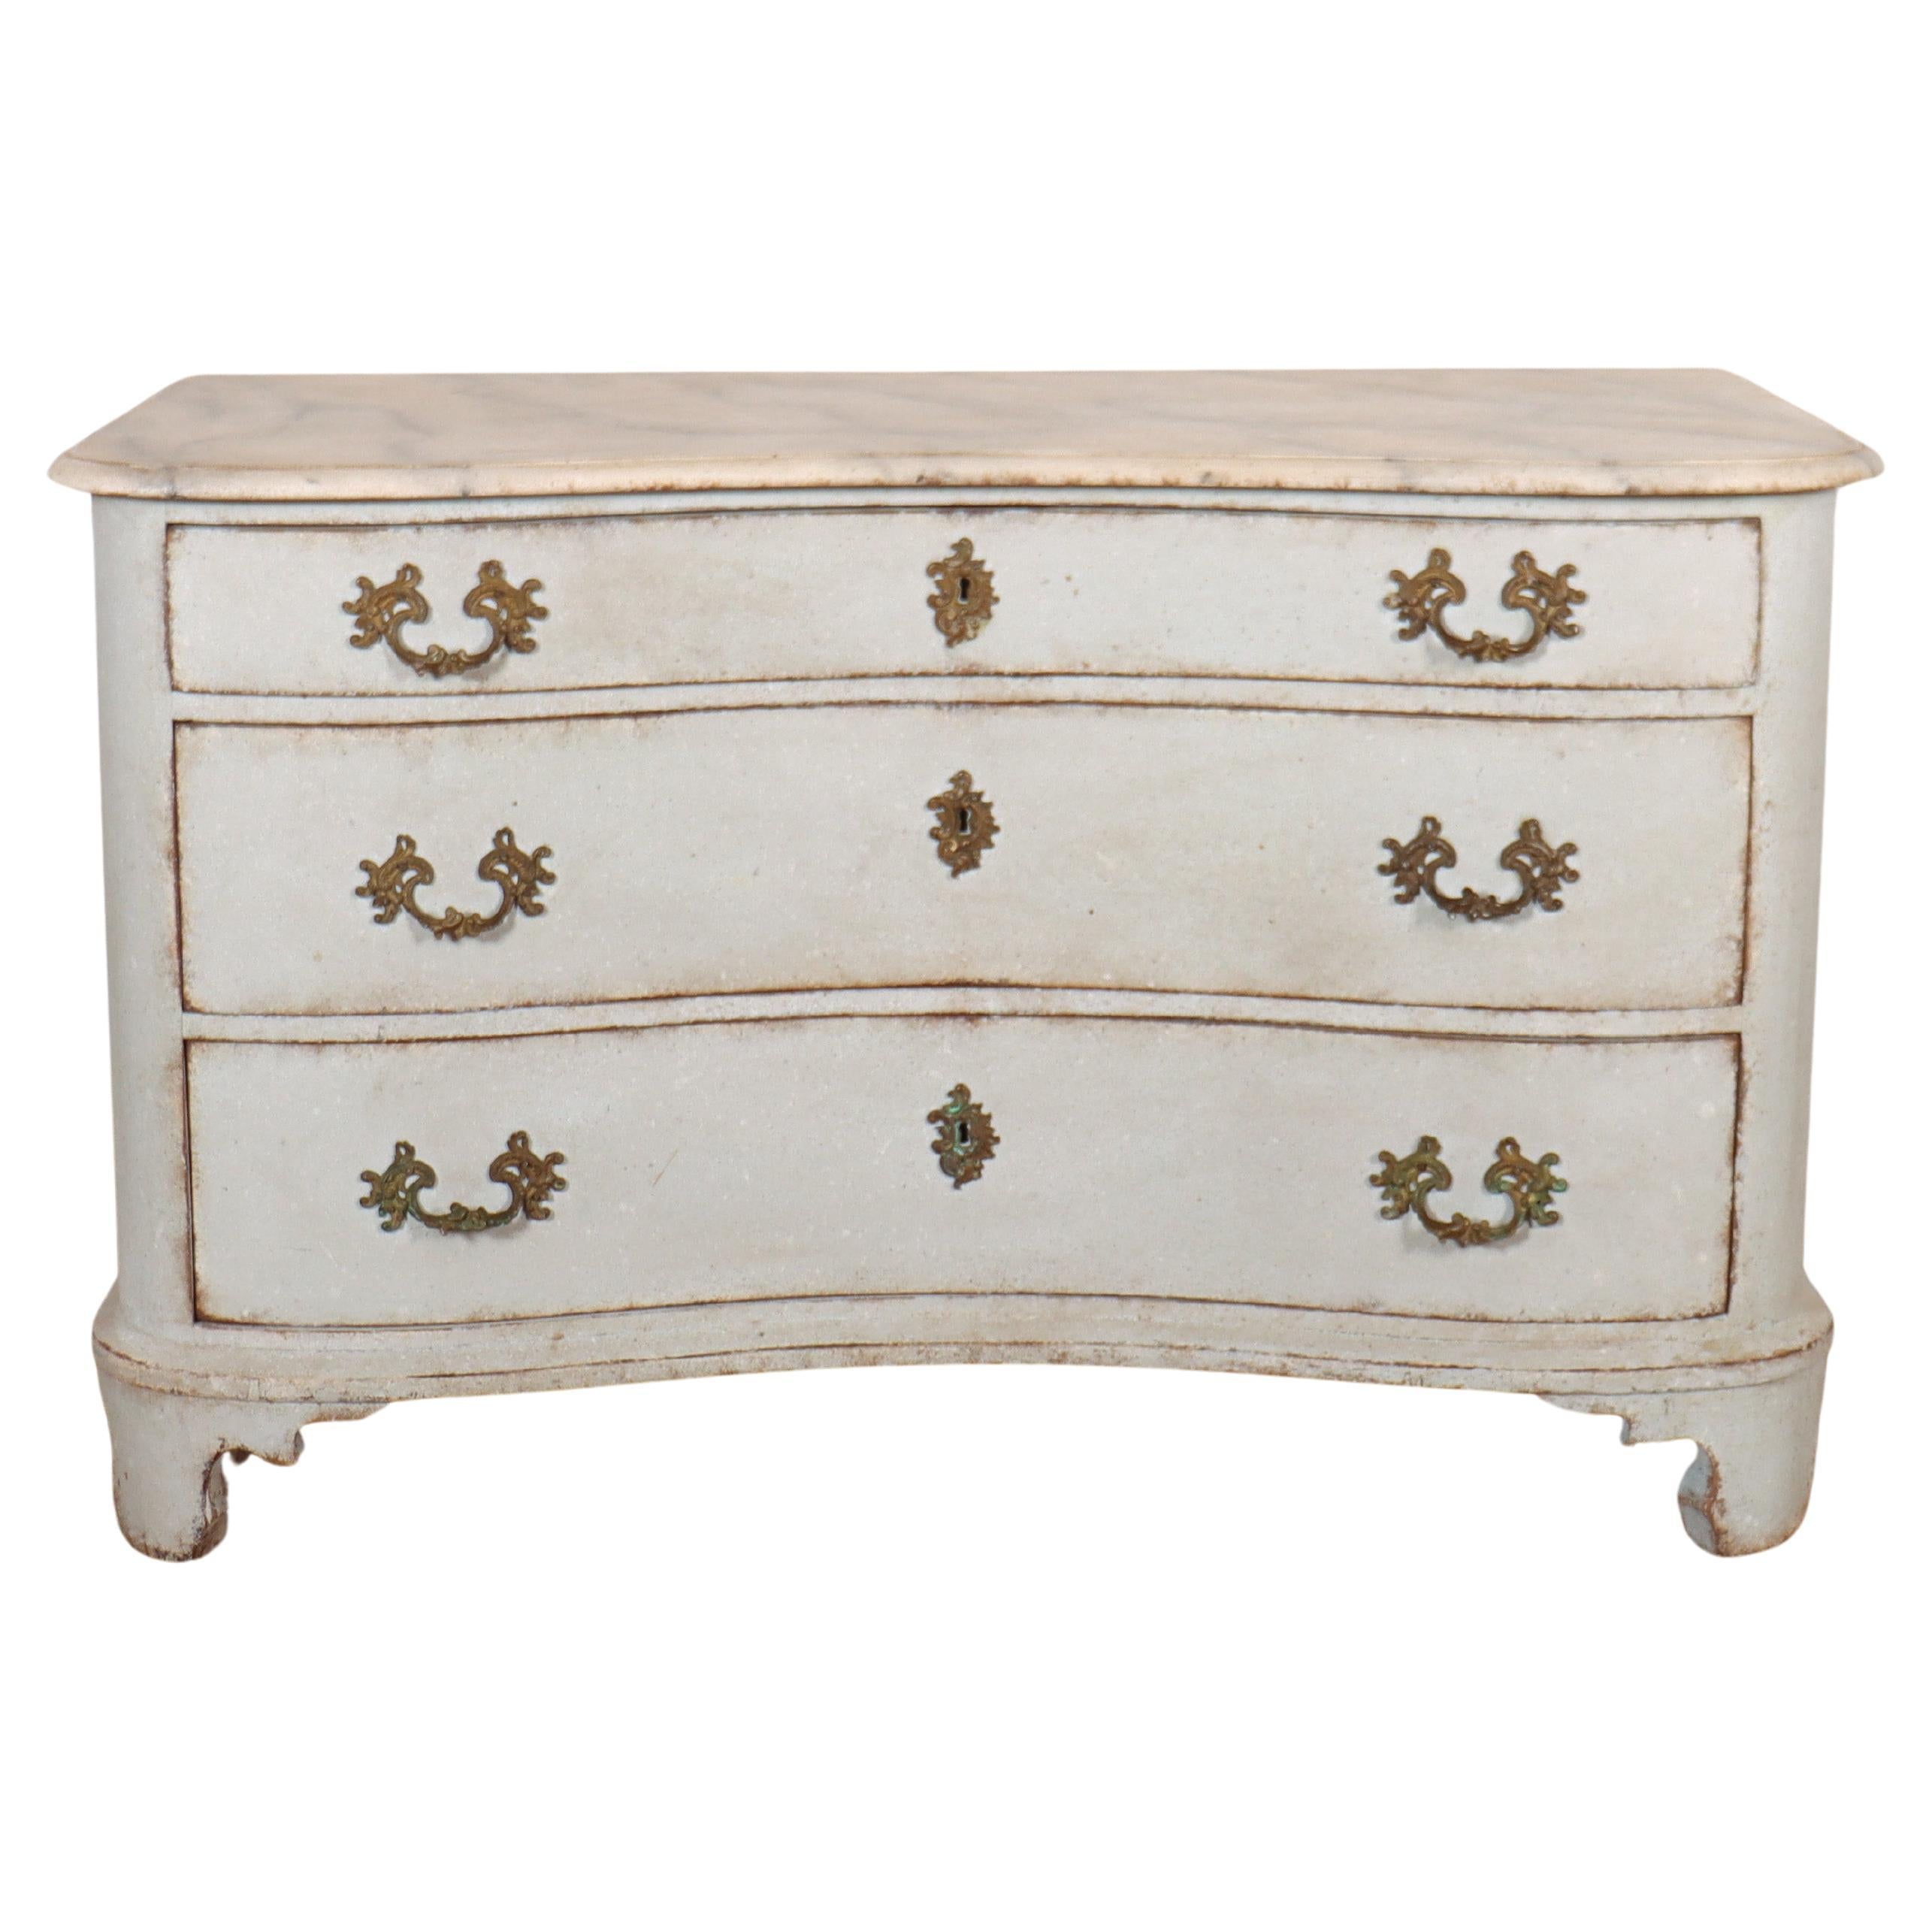 Austrian Painted Serpentine Commode